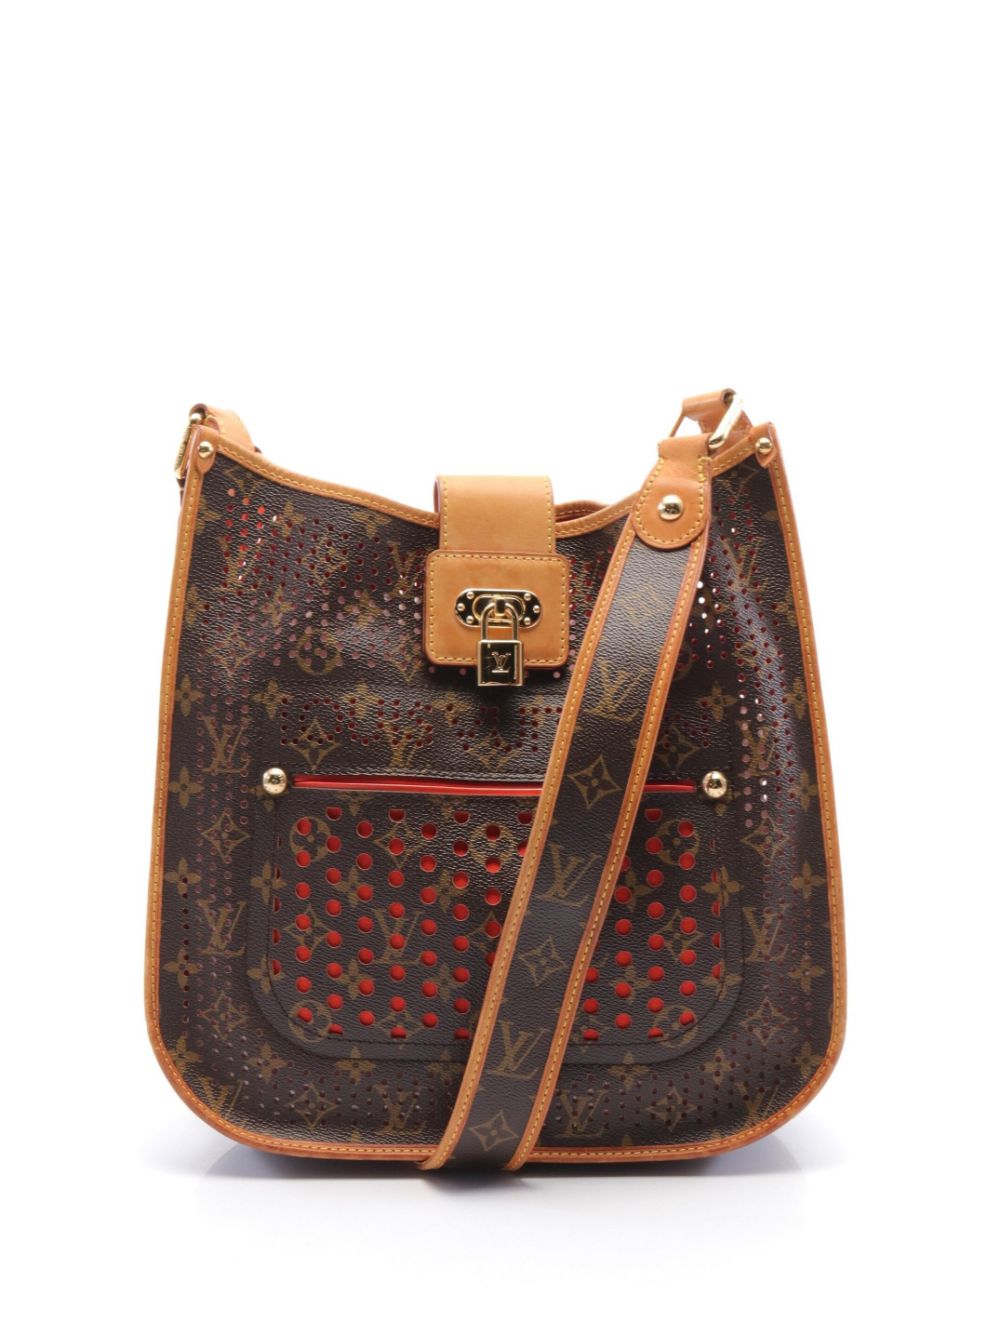 Louis Vuitton 2008 pre-owned Monogram Perforated Musette shoulder bag -  Brown - Realry: A global fashion sites aggregator